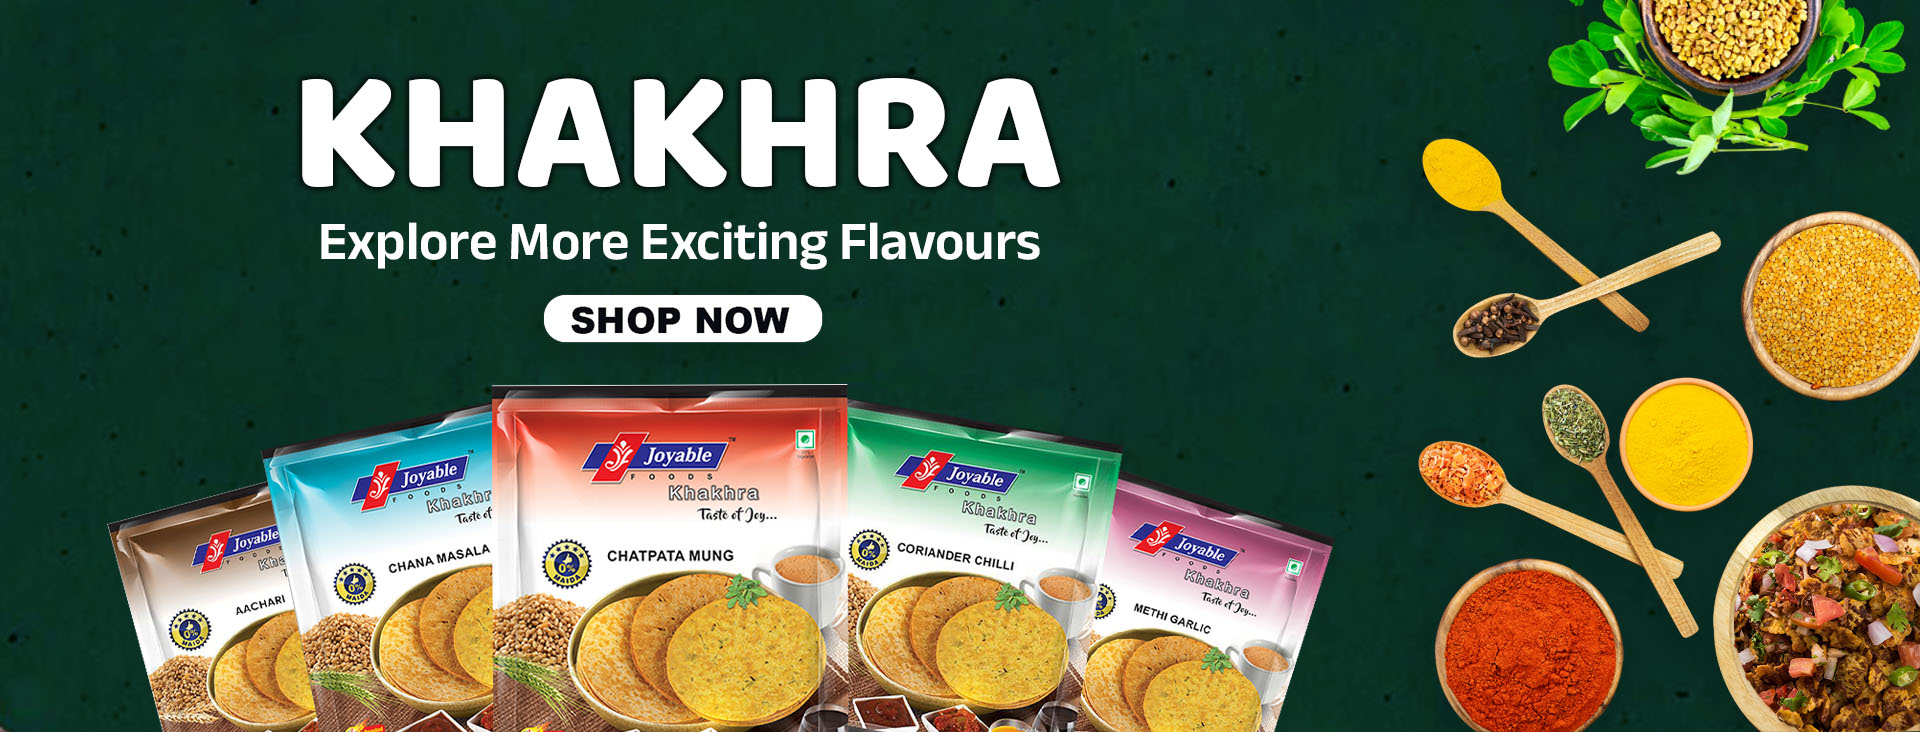 Wide range of khakhra flavours available